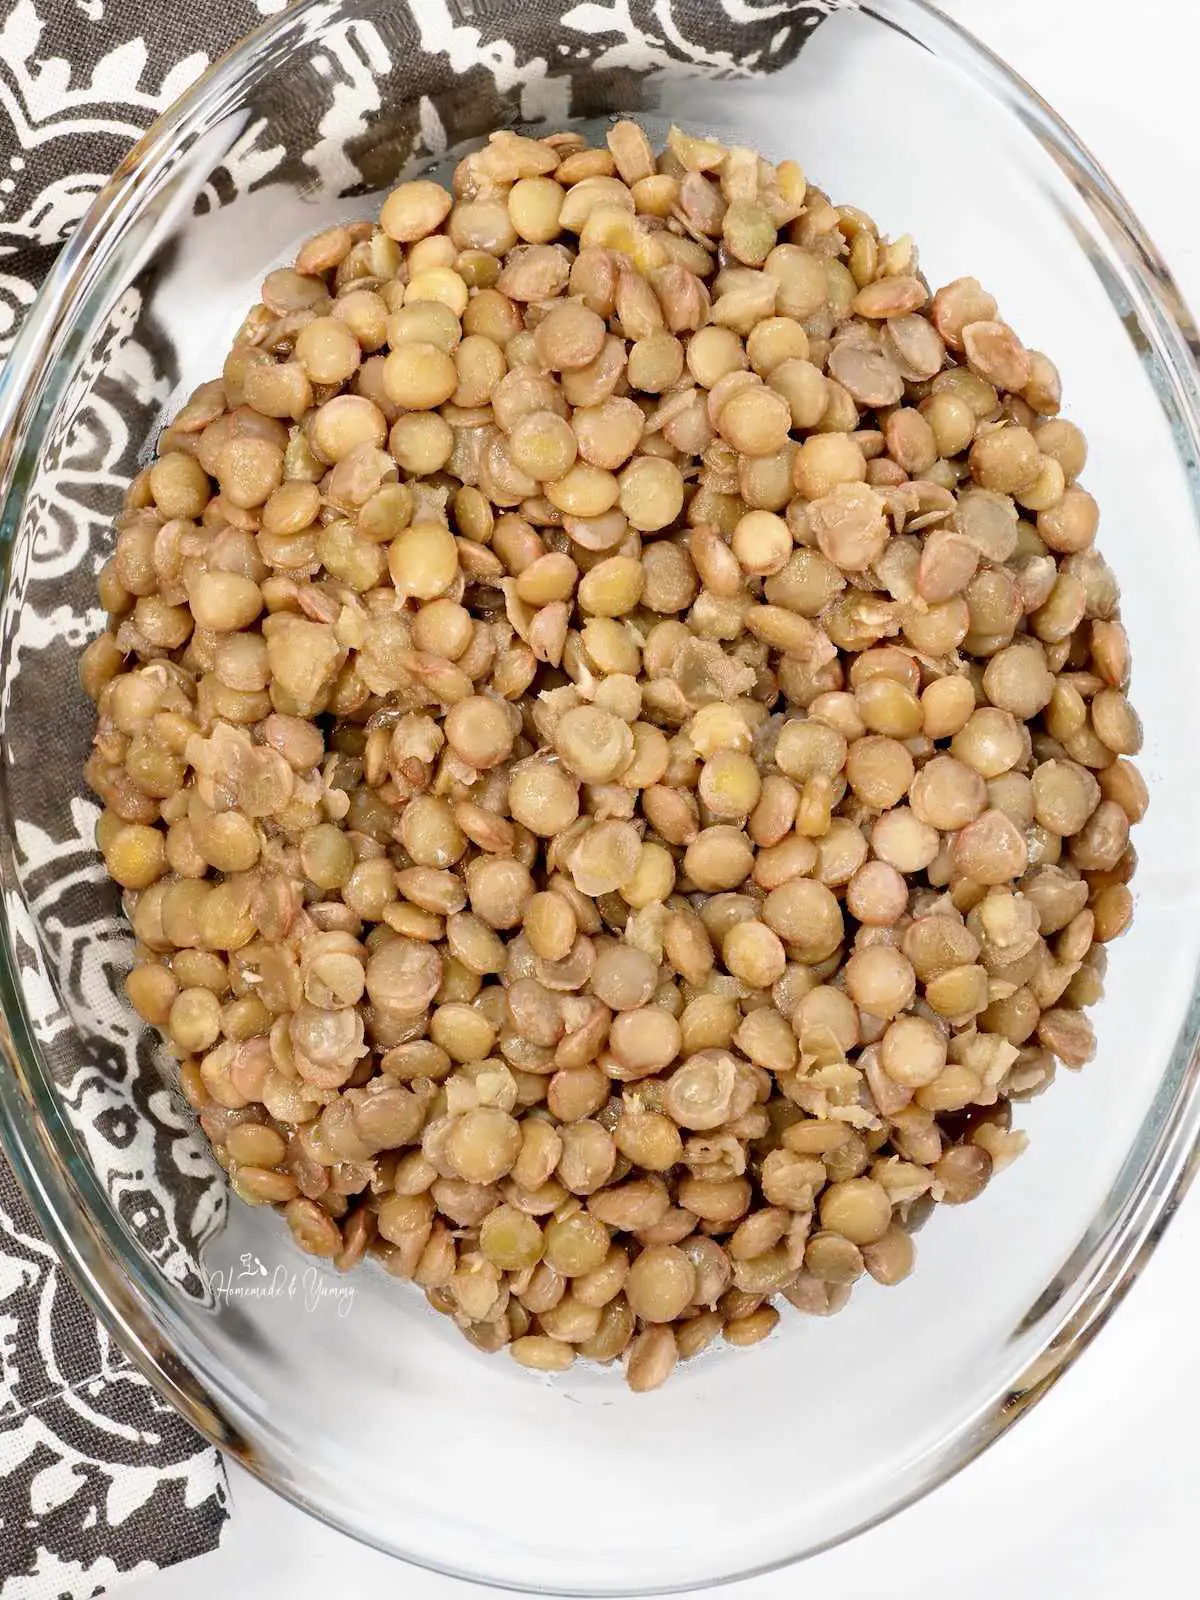 Marinated Lentils in a glass bowl ready for storage